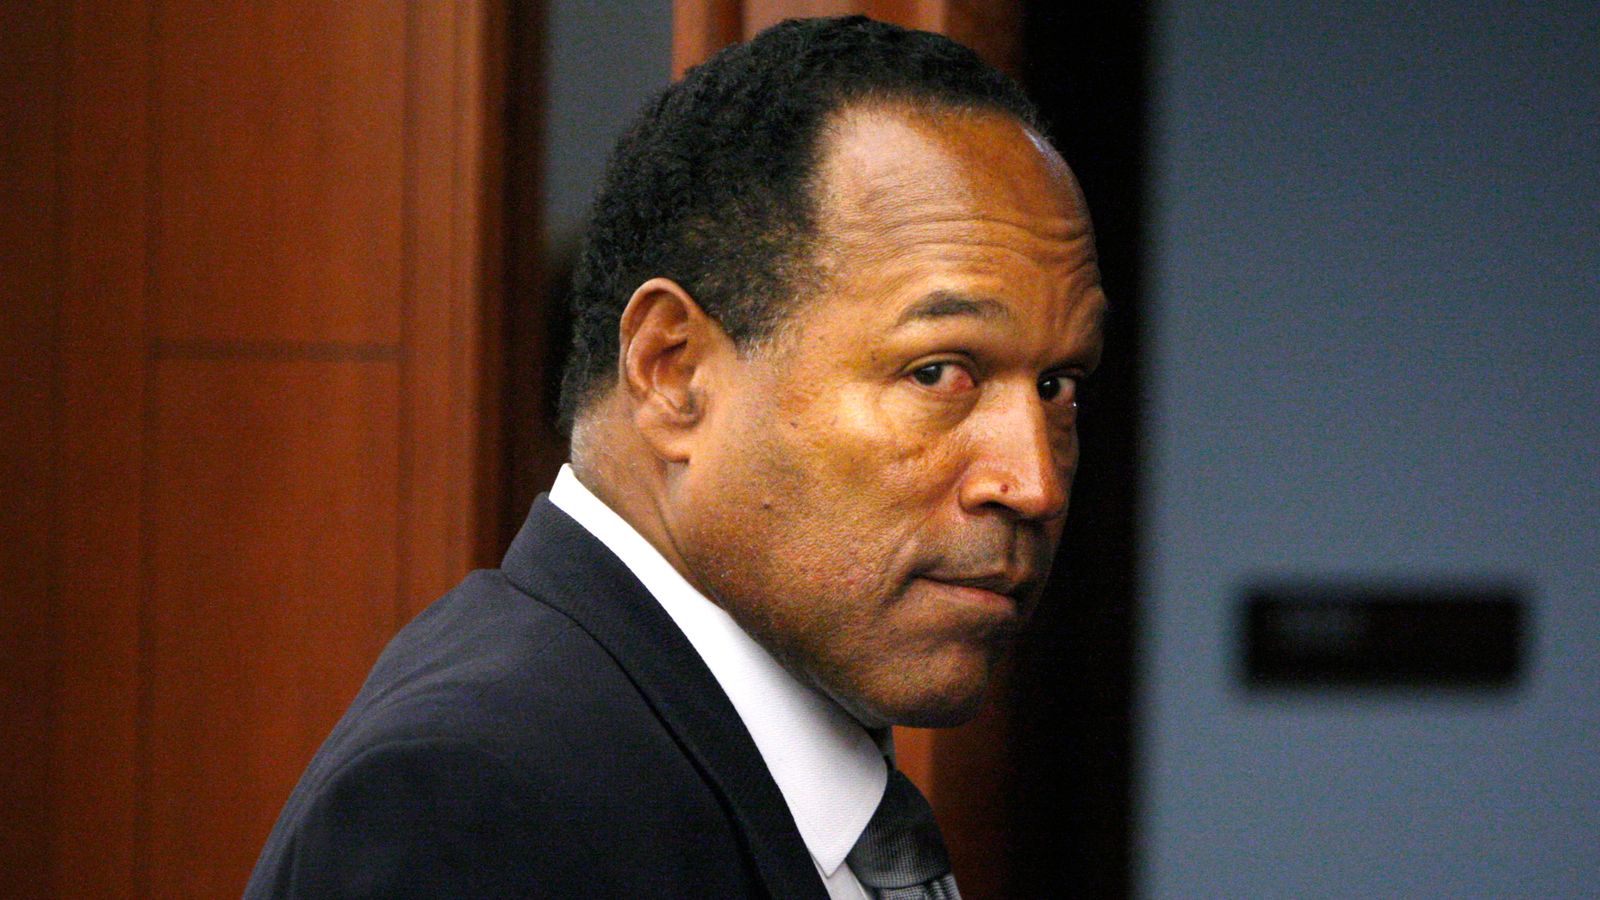 O.J. Simpson has died at the age of 76, his family says